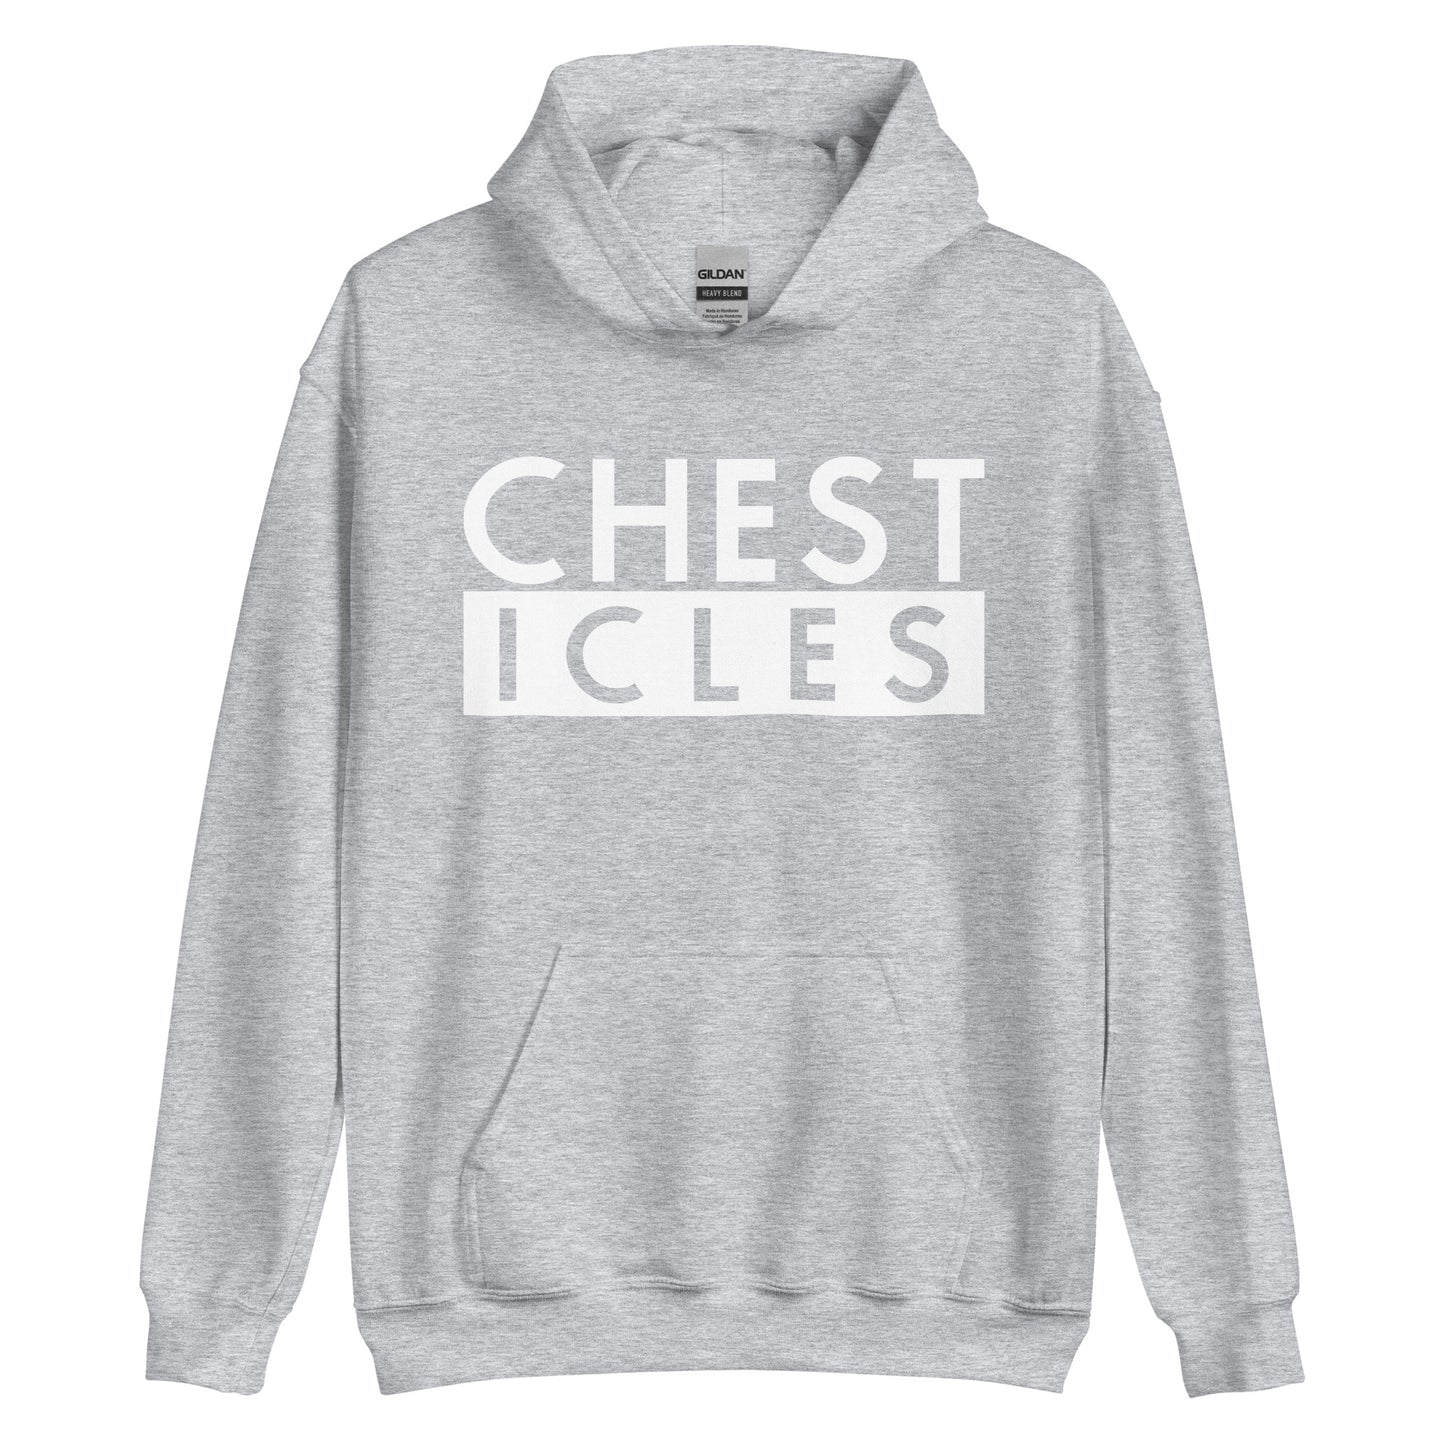 Chesticles Hoodie